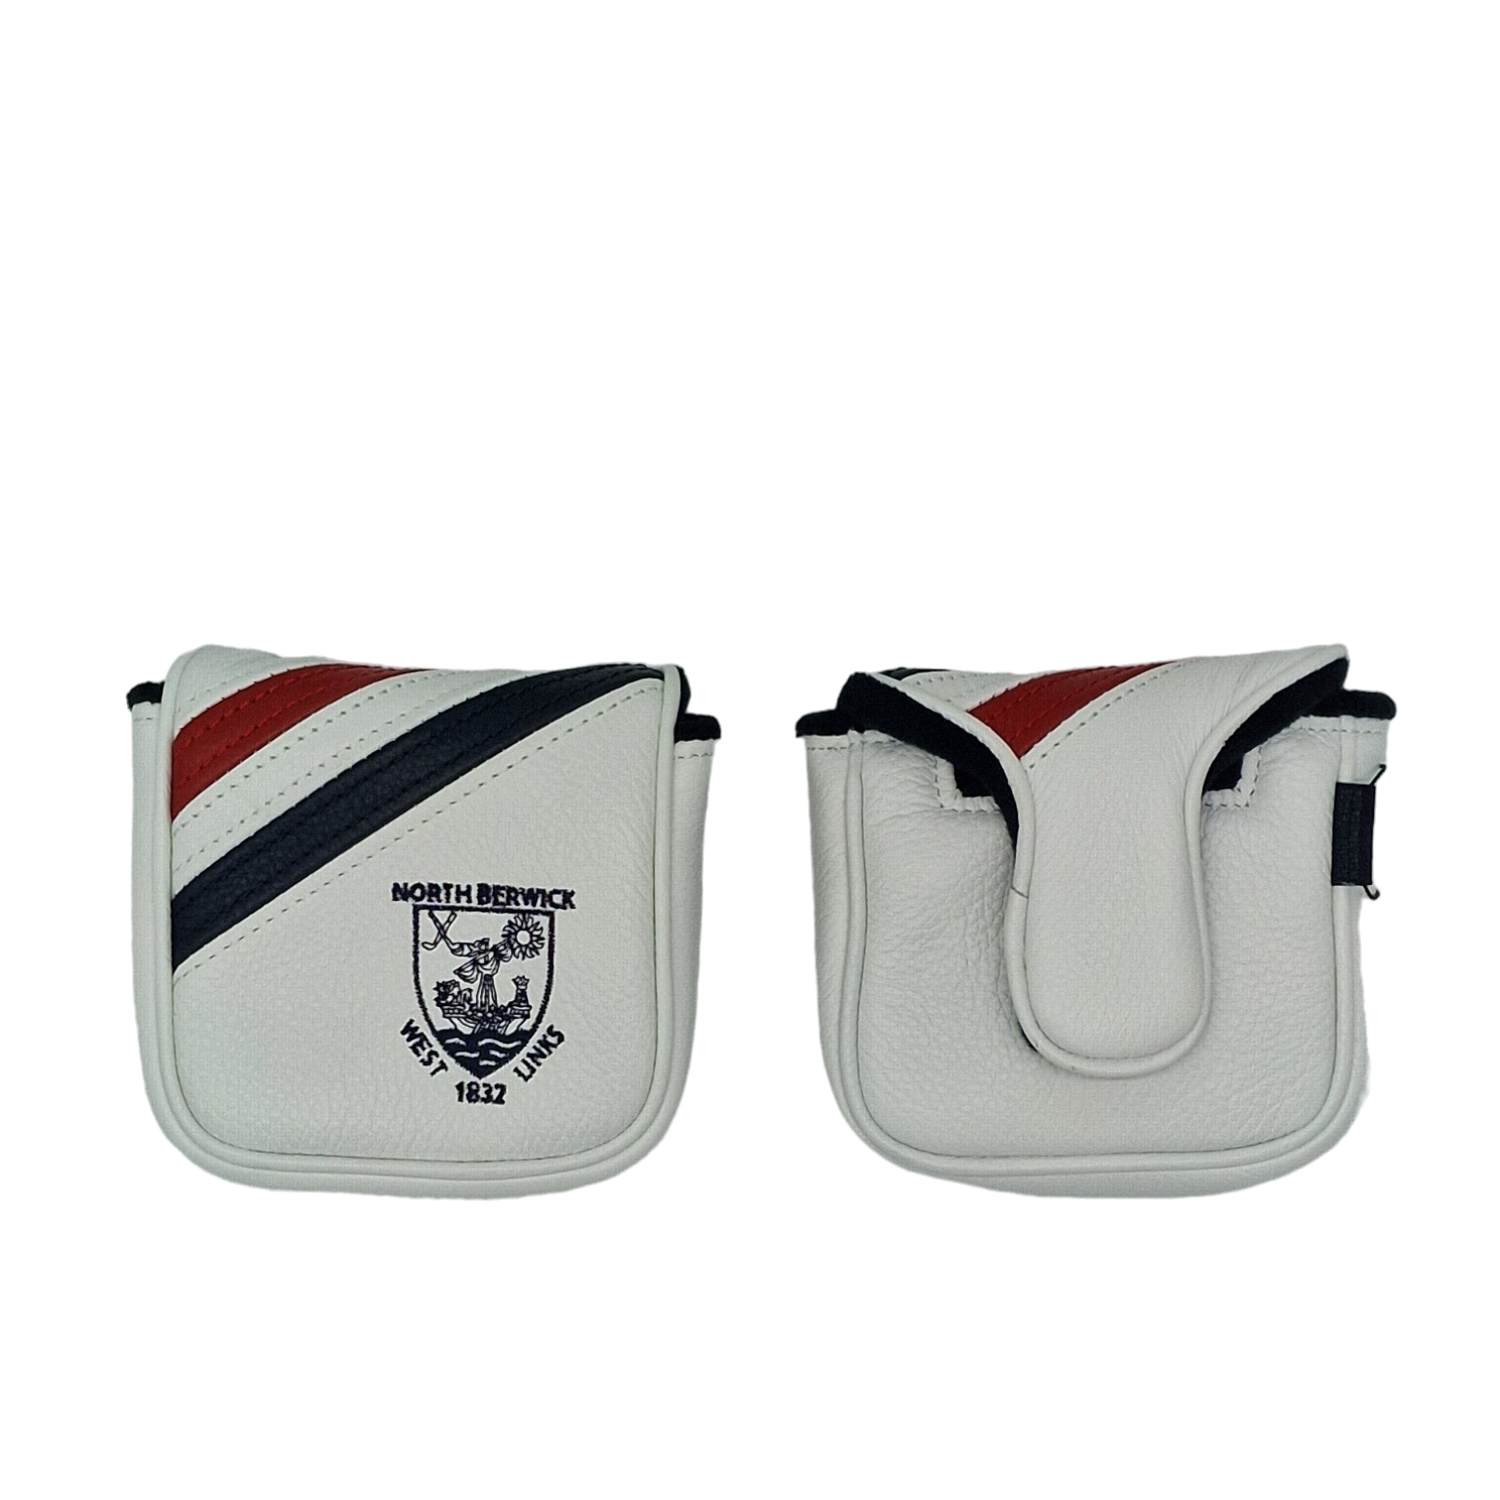 White/Red/Navy Stripe Leather Mallet Putter Cover